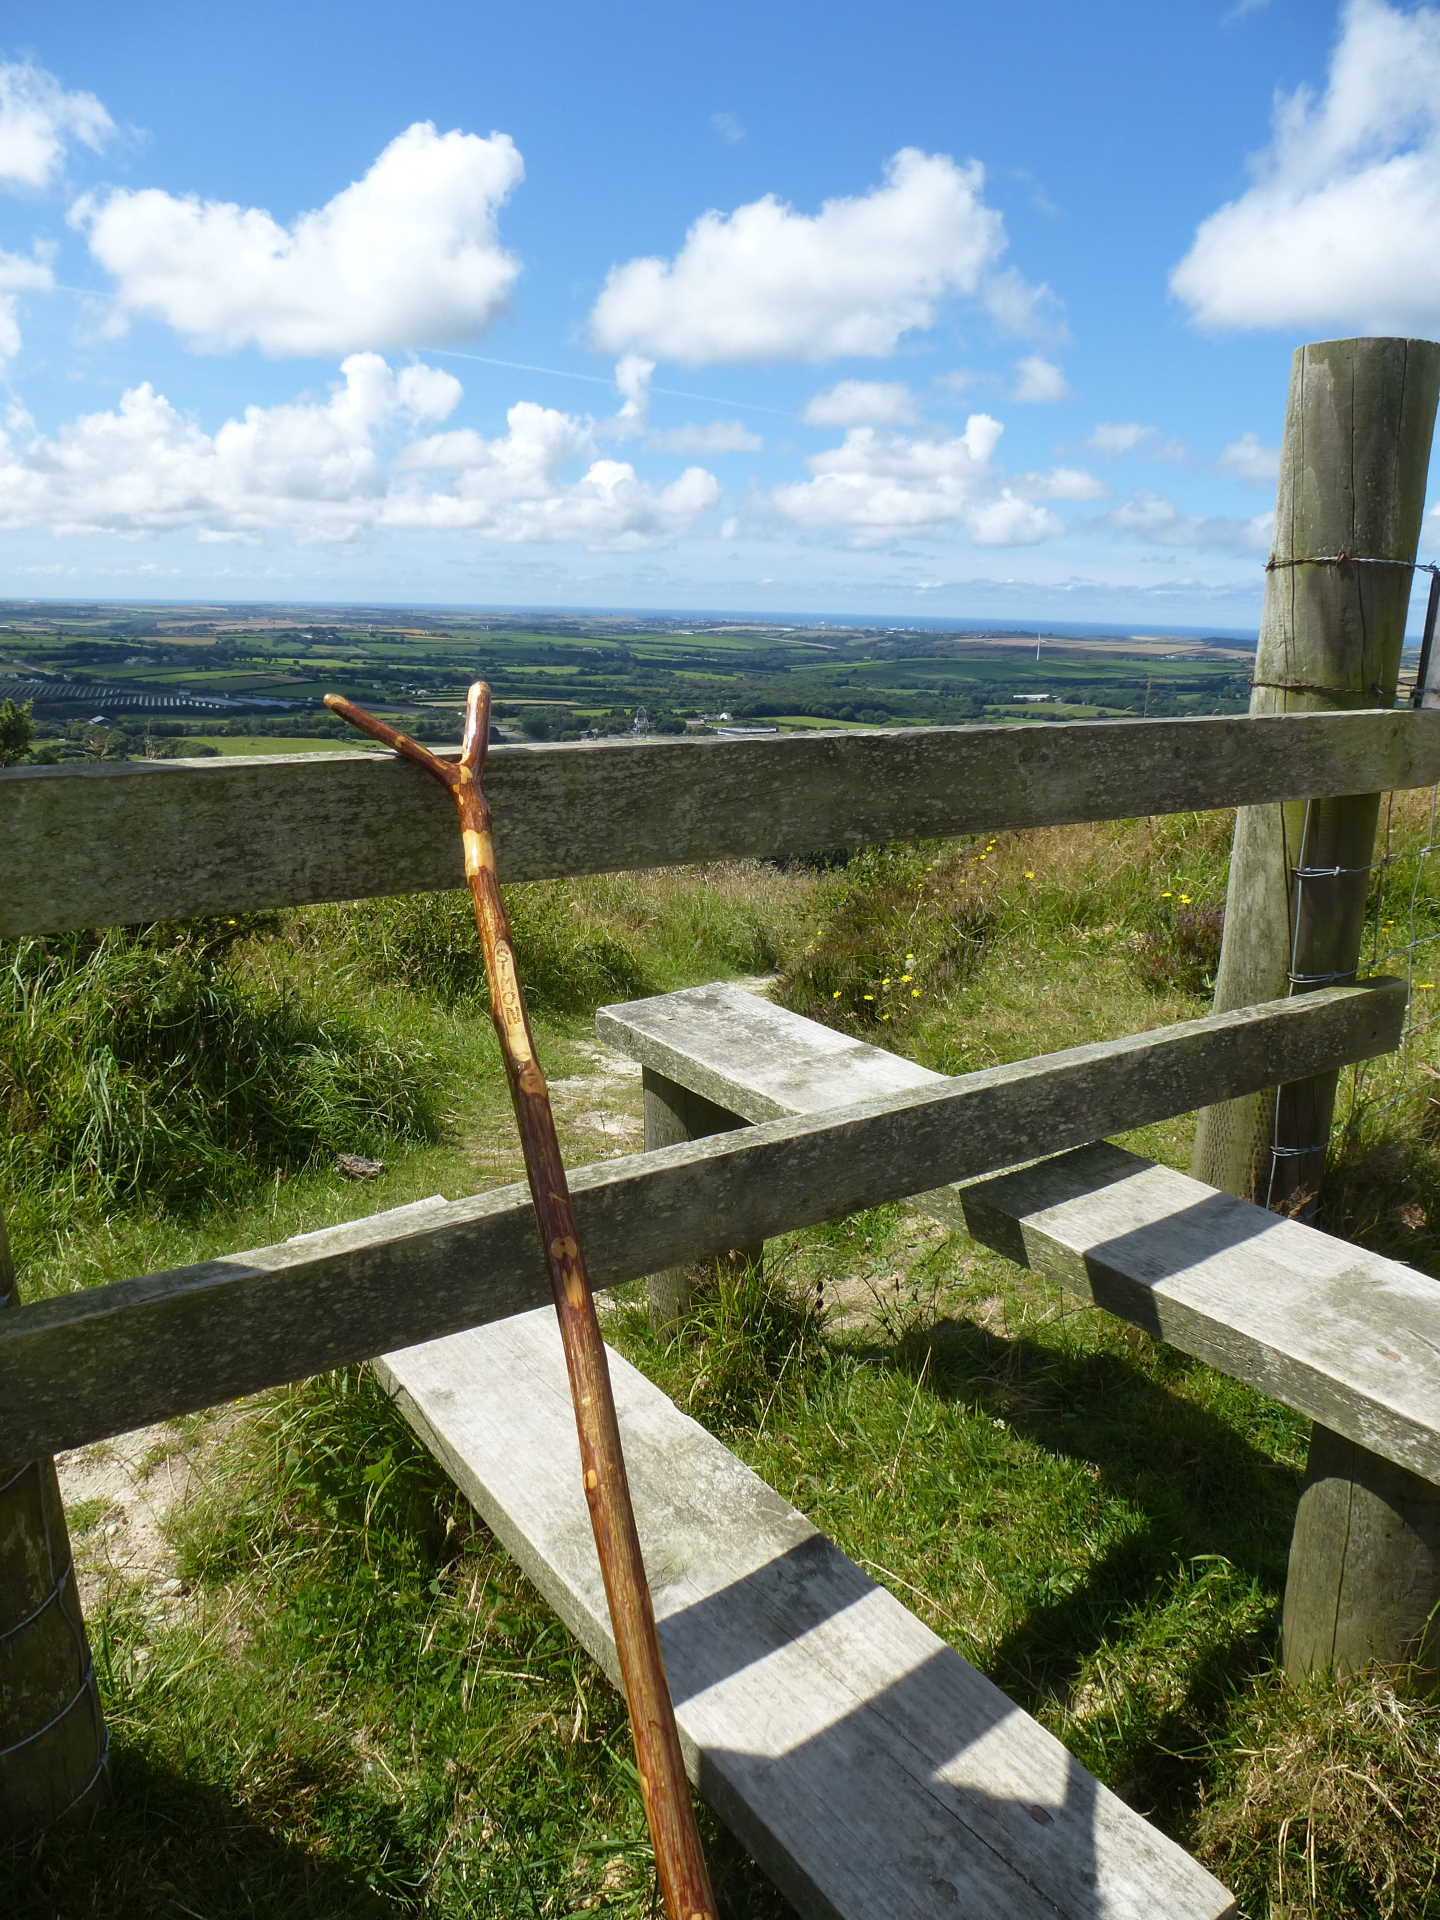 Wooden walking stick up against a stile overlooking greenery